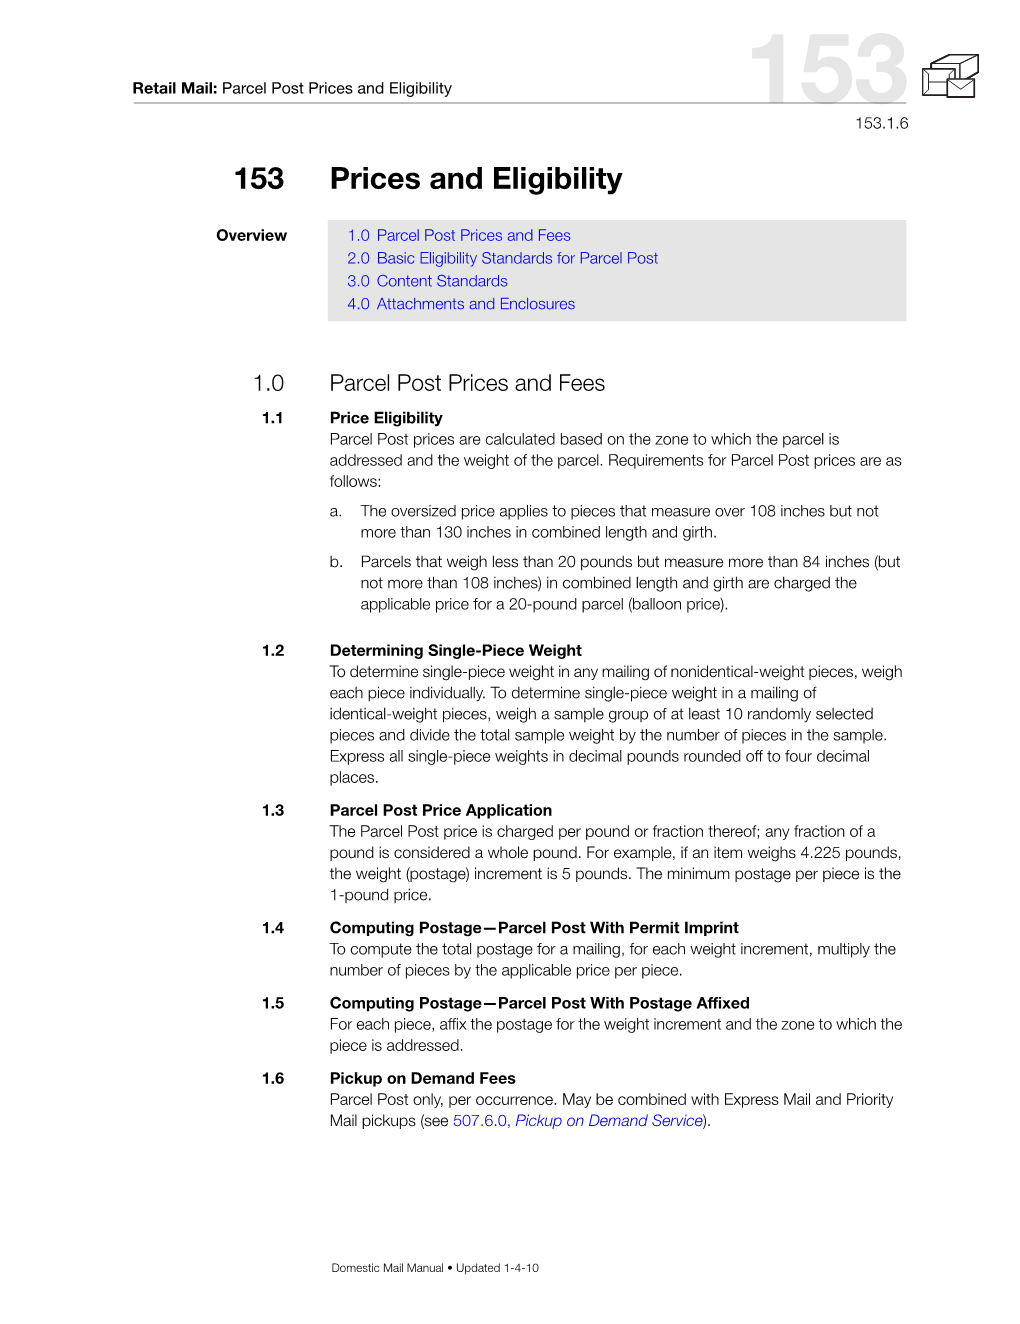 DMM 153 Parcel Post Prices and Eligibility for Retail Parcels